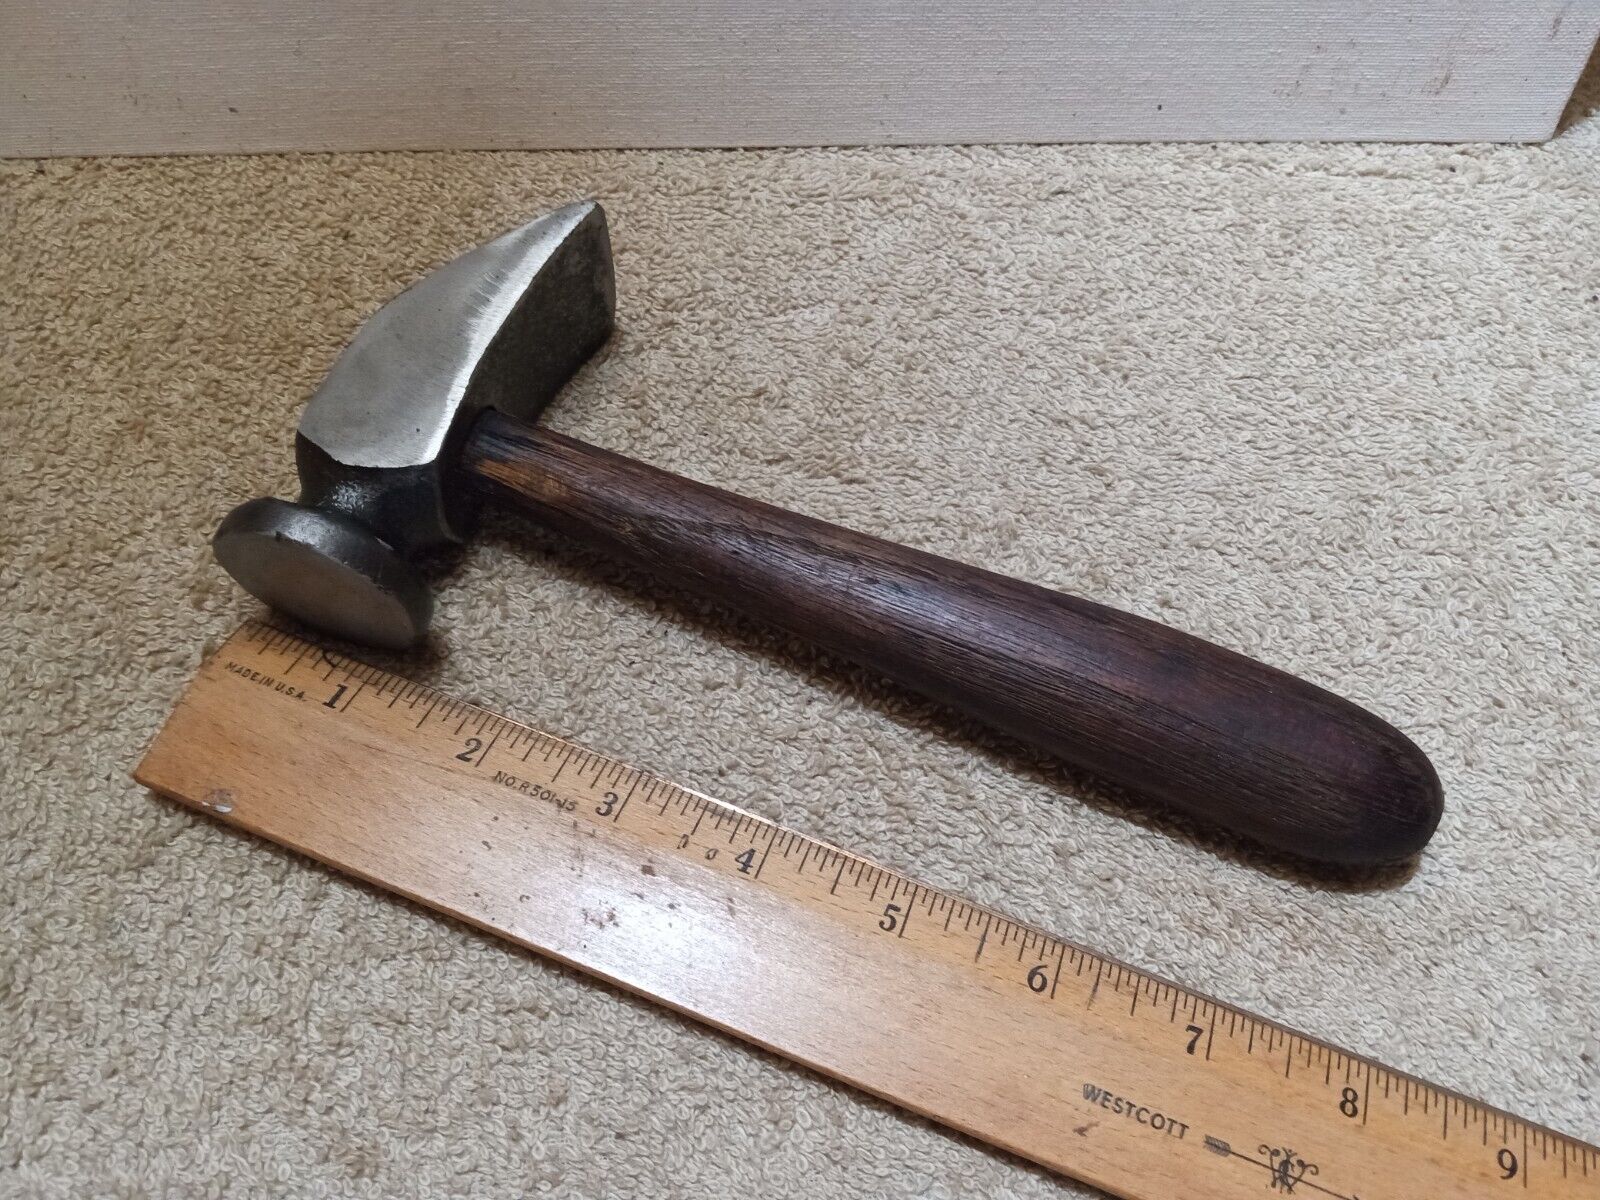 ANTIQUE COBBLER HAMMER POSSIBLE NO.4 CHARLES HAMMOND SHOE MAKER LATE 1800'S NICE